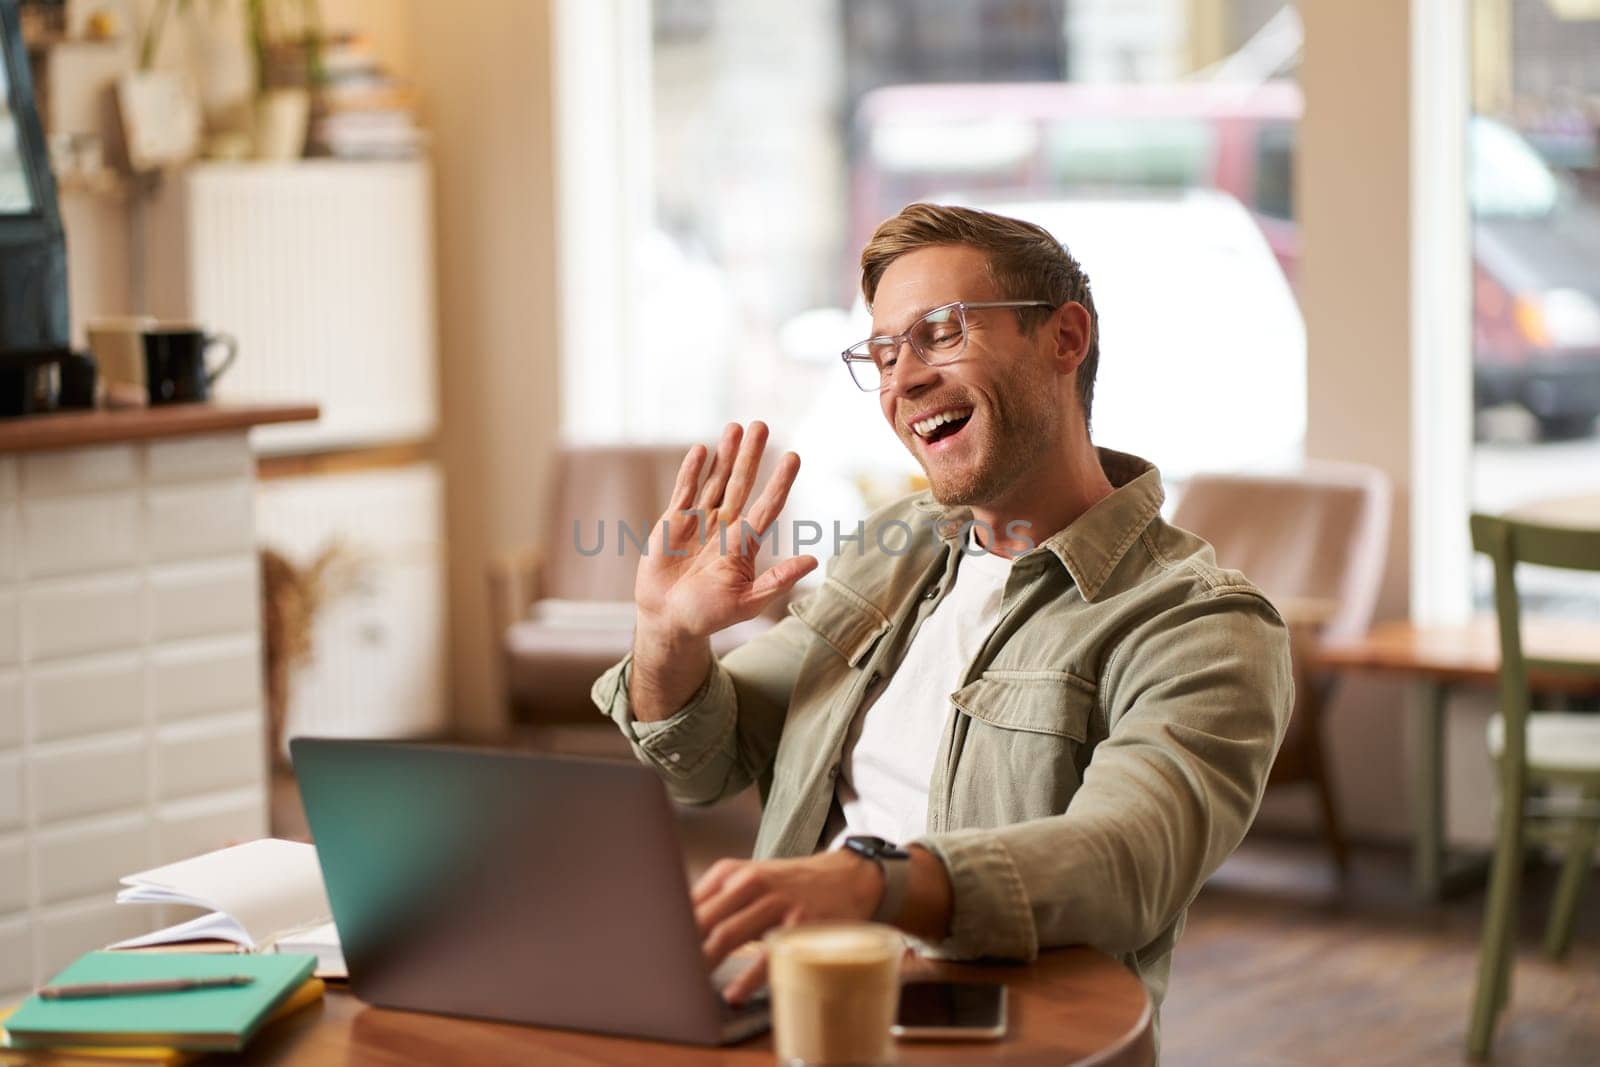 Portrait of handsome, smiling young man, online tutor, businessman working in cafe remotely, waving hand at laptop, connects to video chat or meeting.